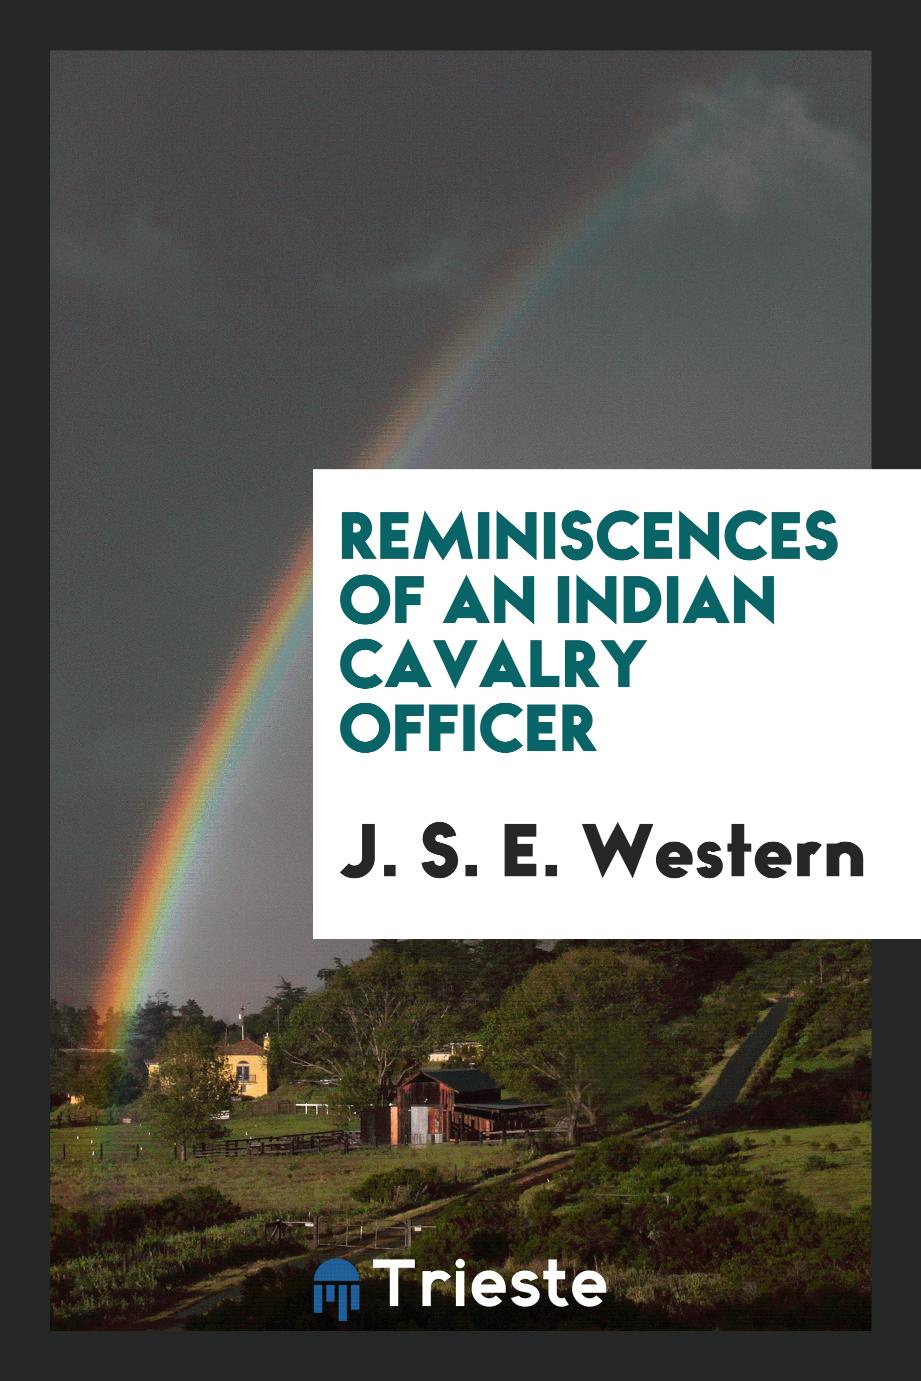 Reminiscences of an Indian cavalry officer